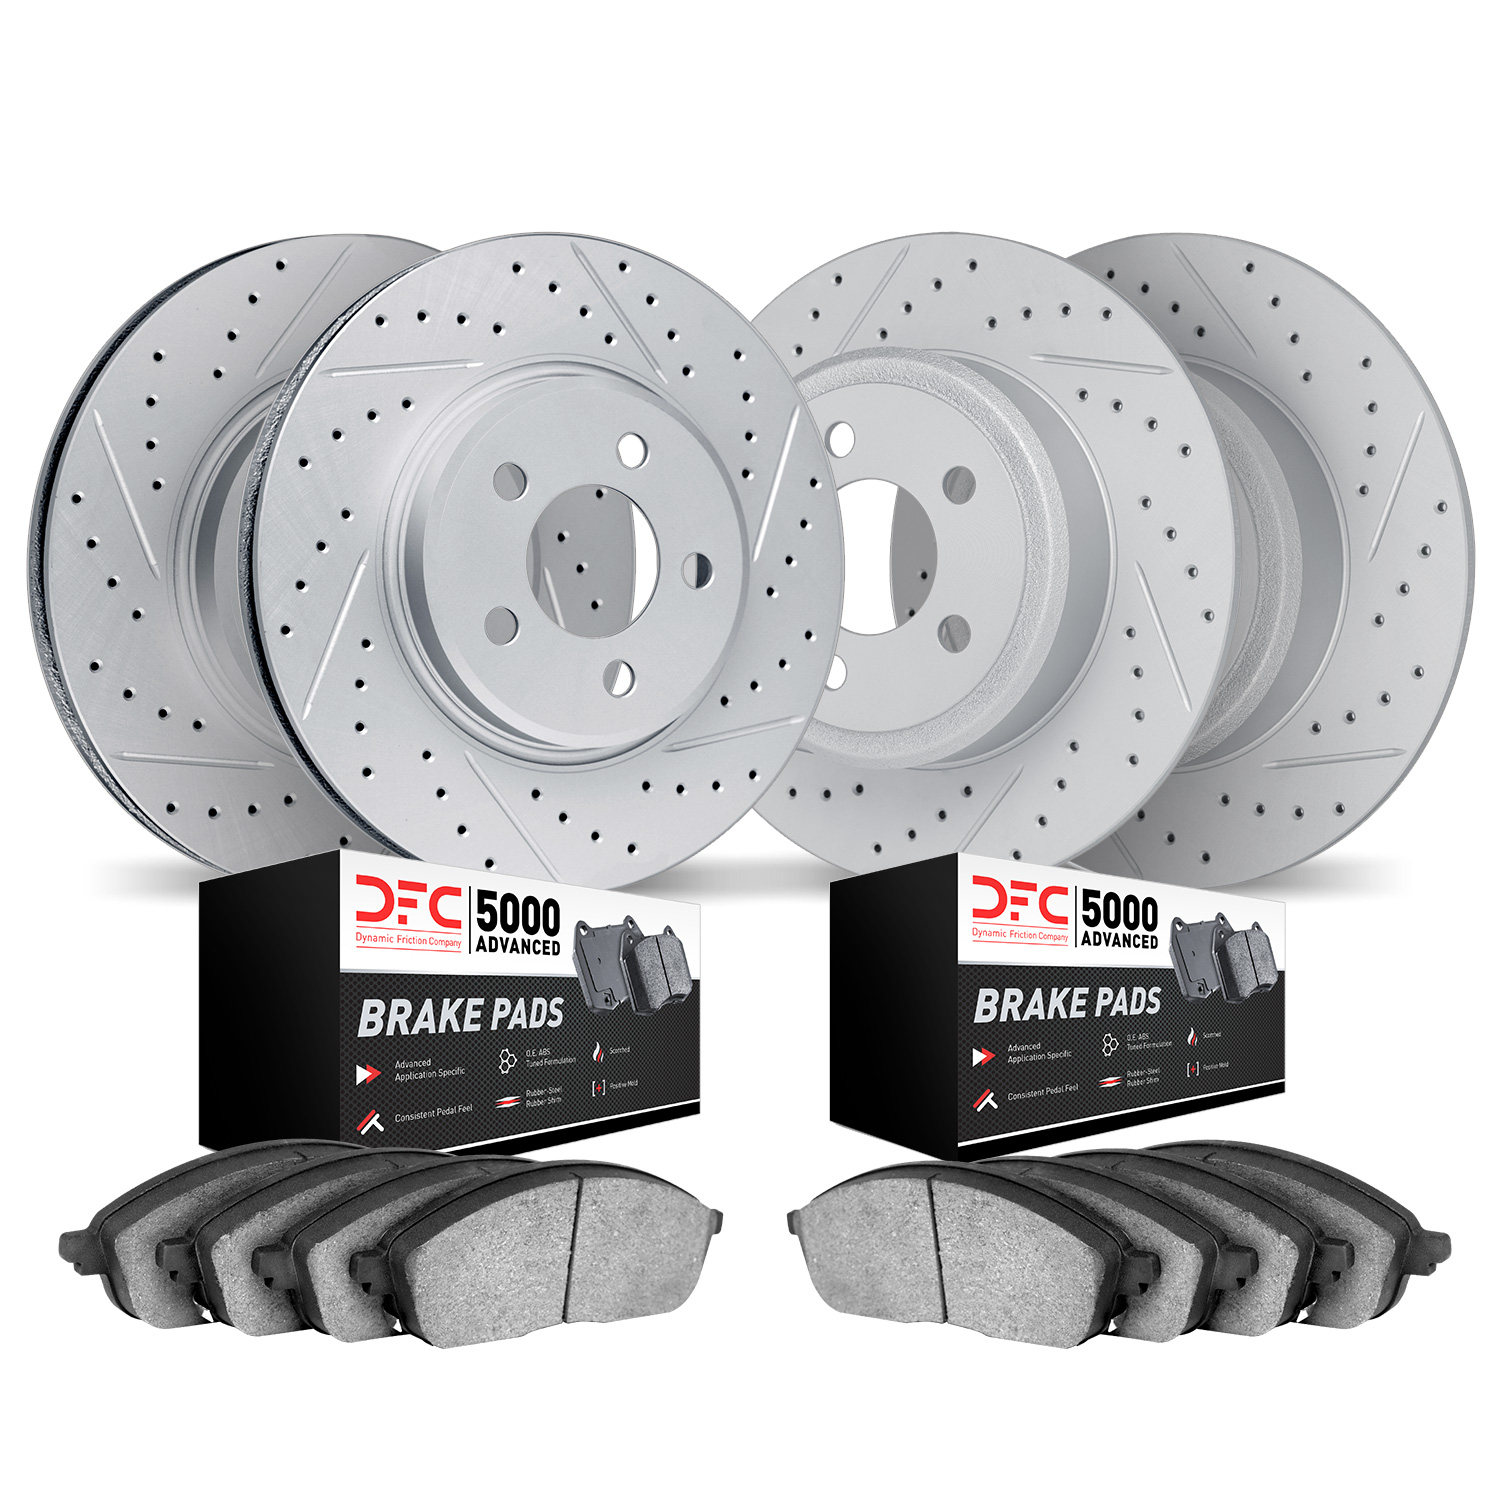 2504-54237 Geoperformance Drilled/Slotted Rotors w/5000 Advanced Brake Pads Kit, 2001-2002 Ford/Lincoln/Mercury/Mazda, Position: